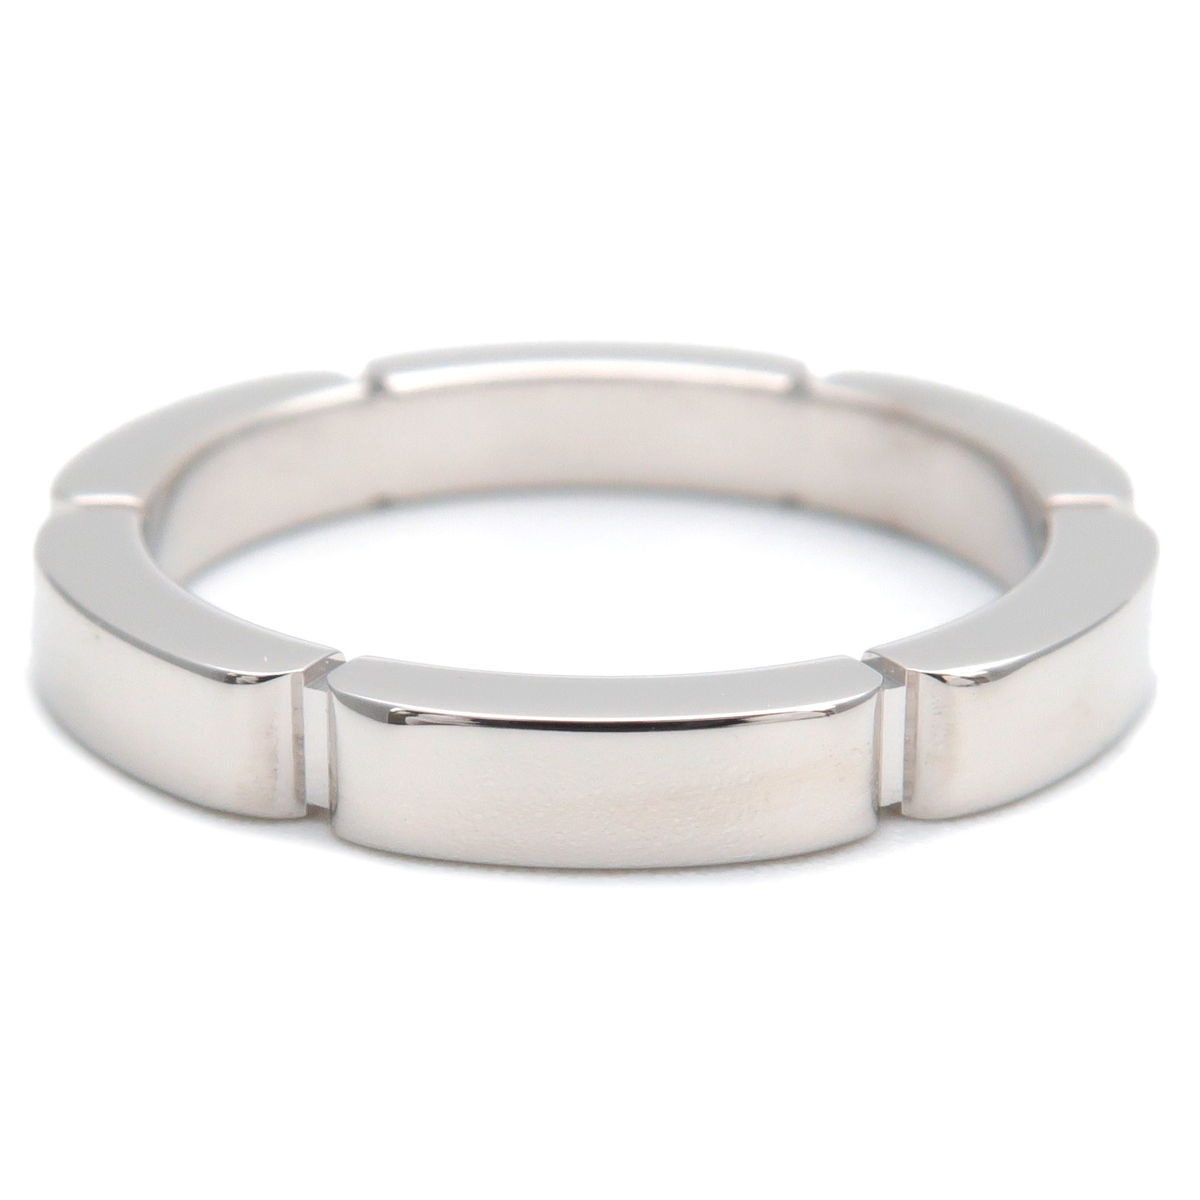 Cartier maillon Panthere Ring White Gold K18WG #47 US4 EU47